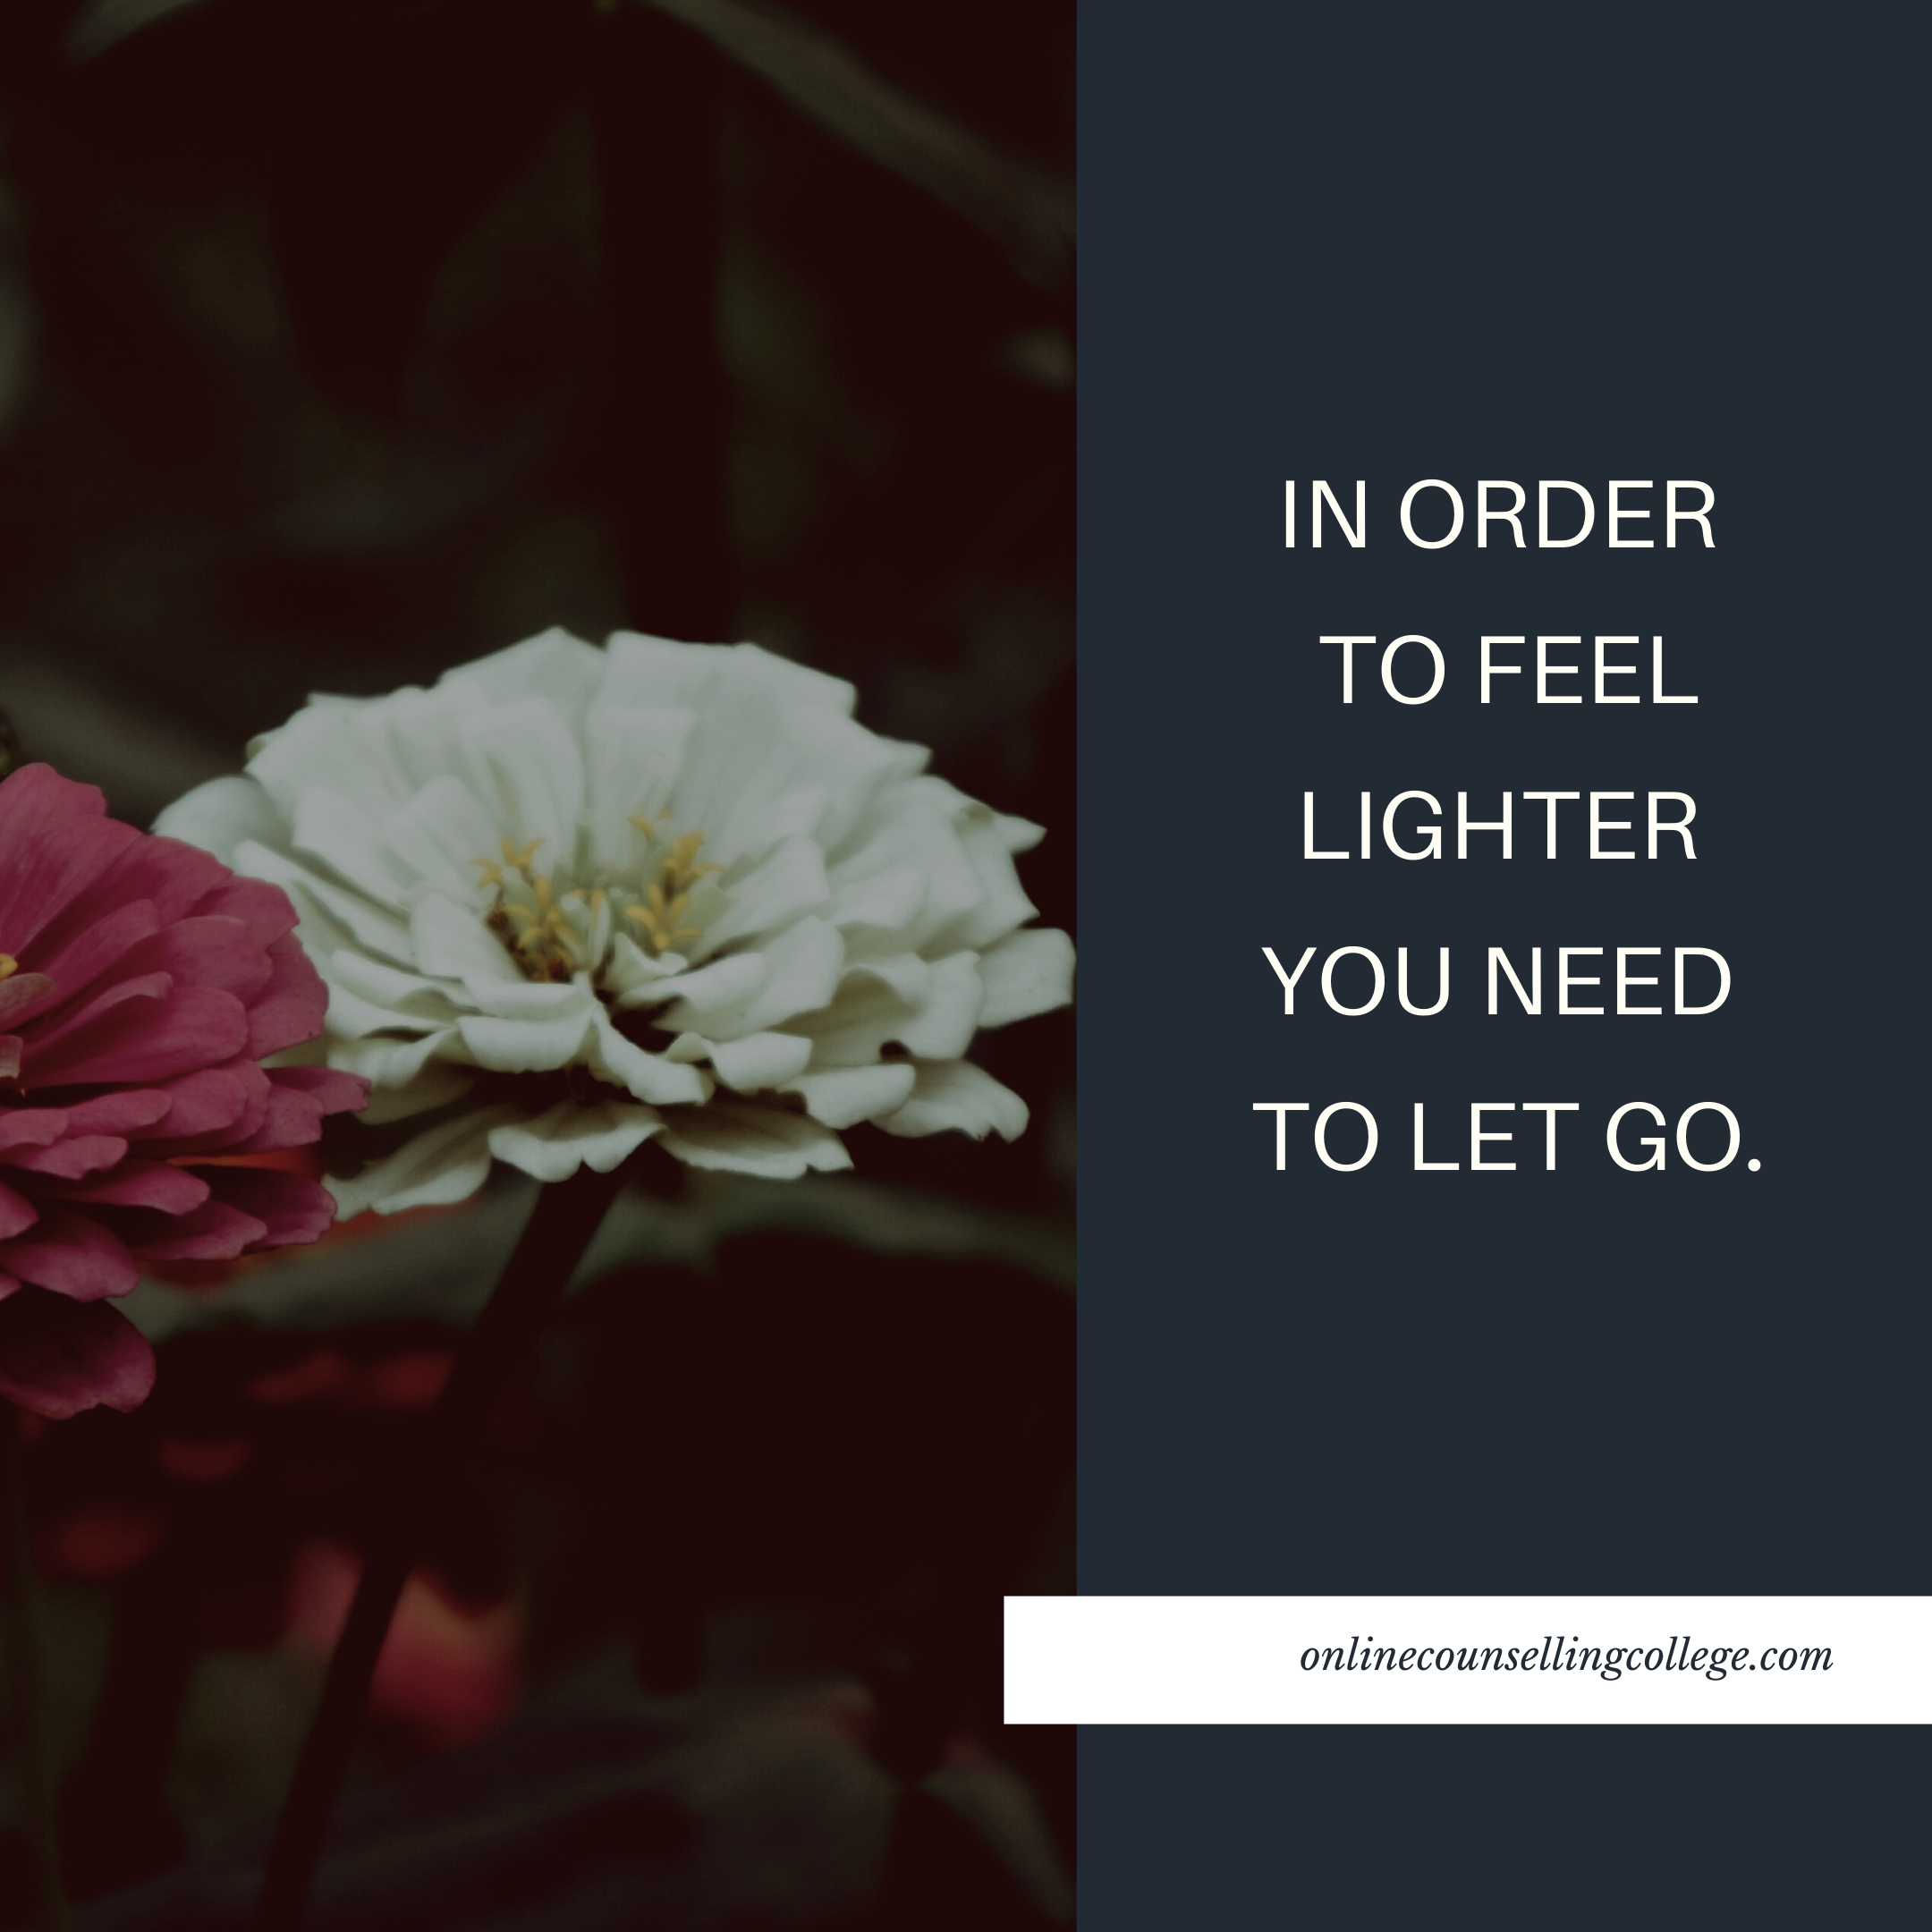 In order to feel lighter we need to let go